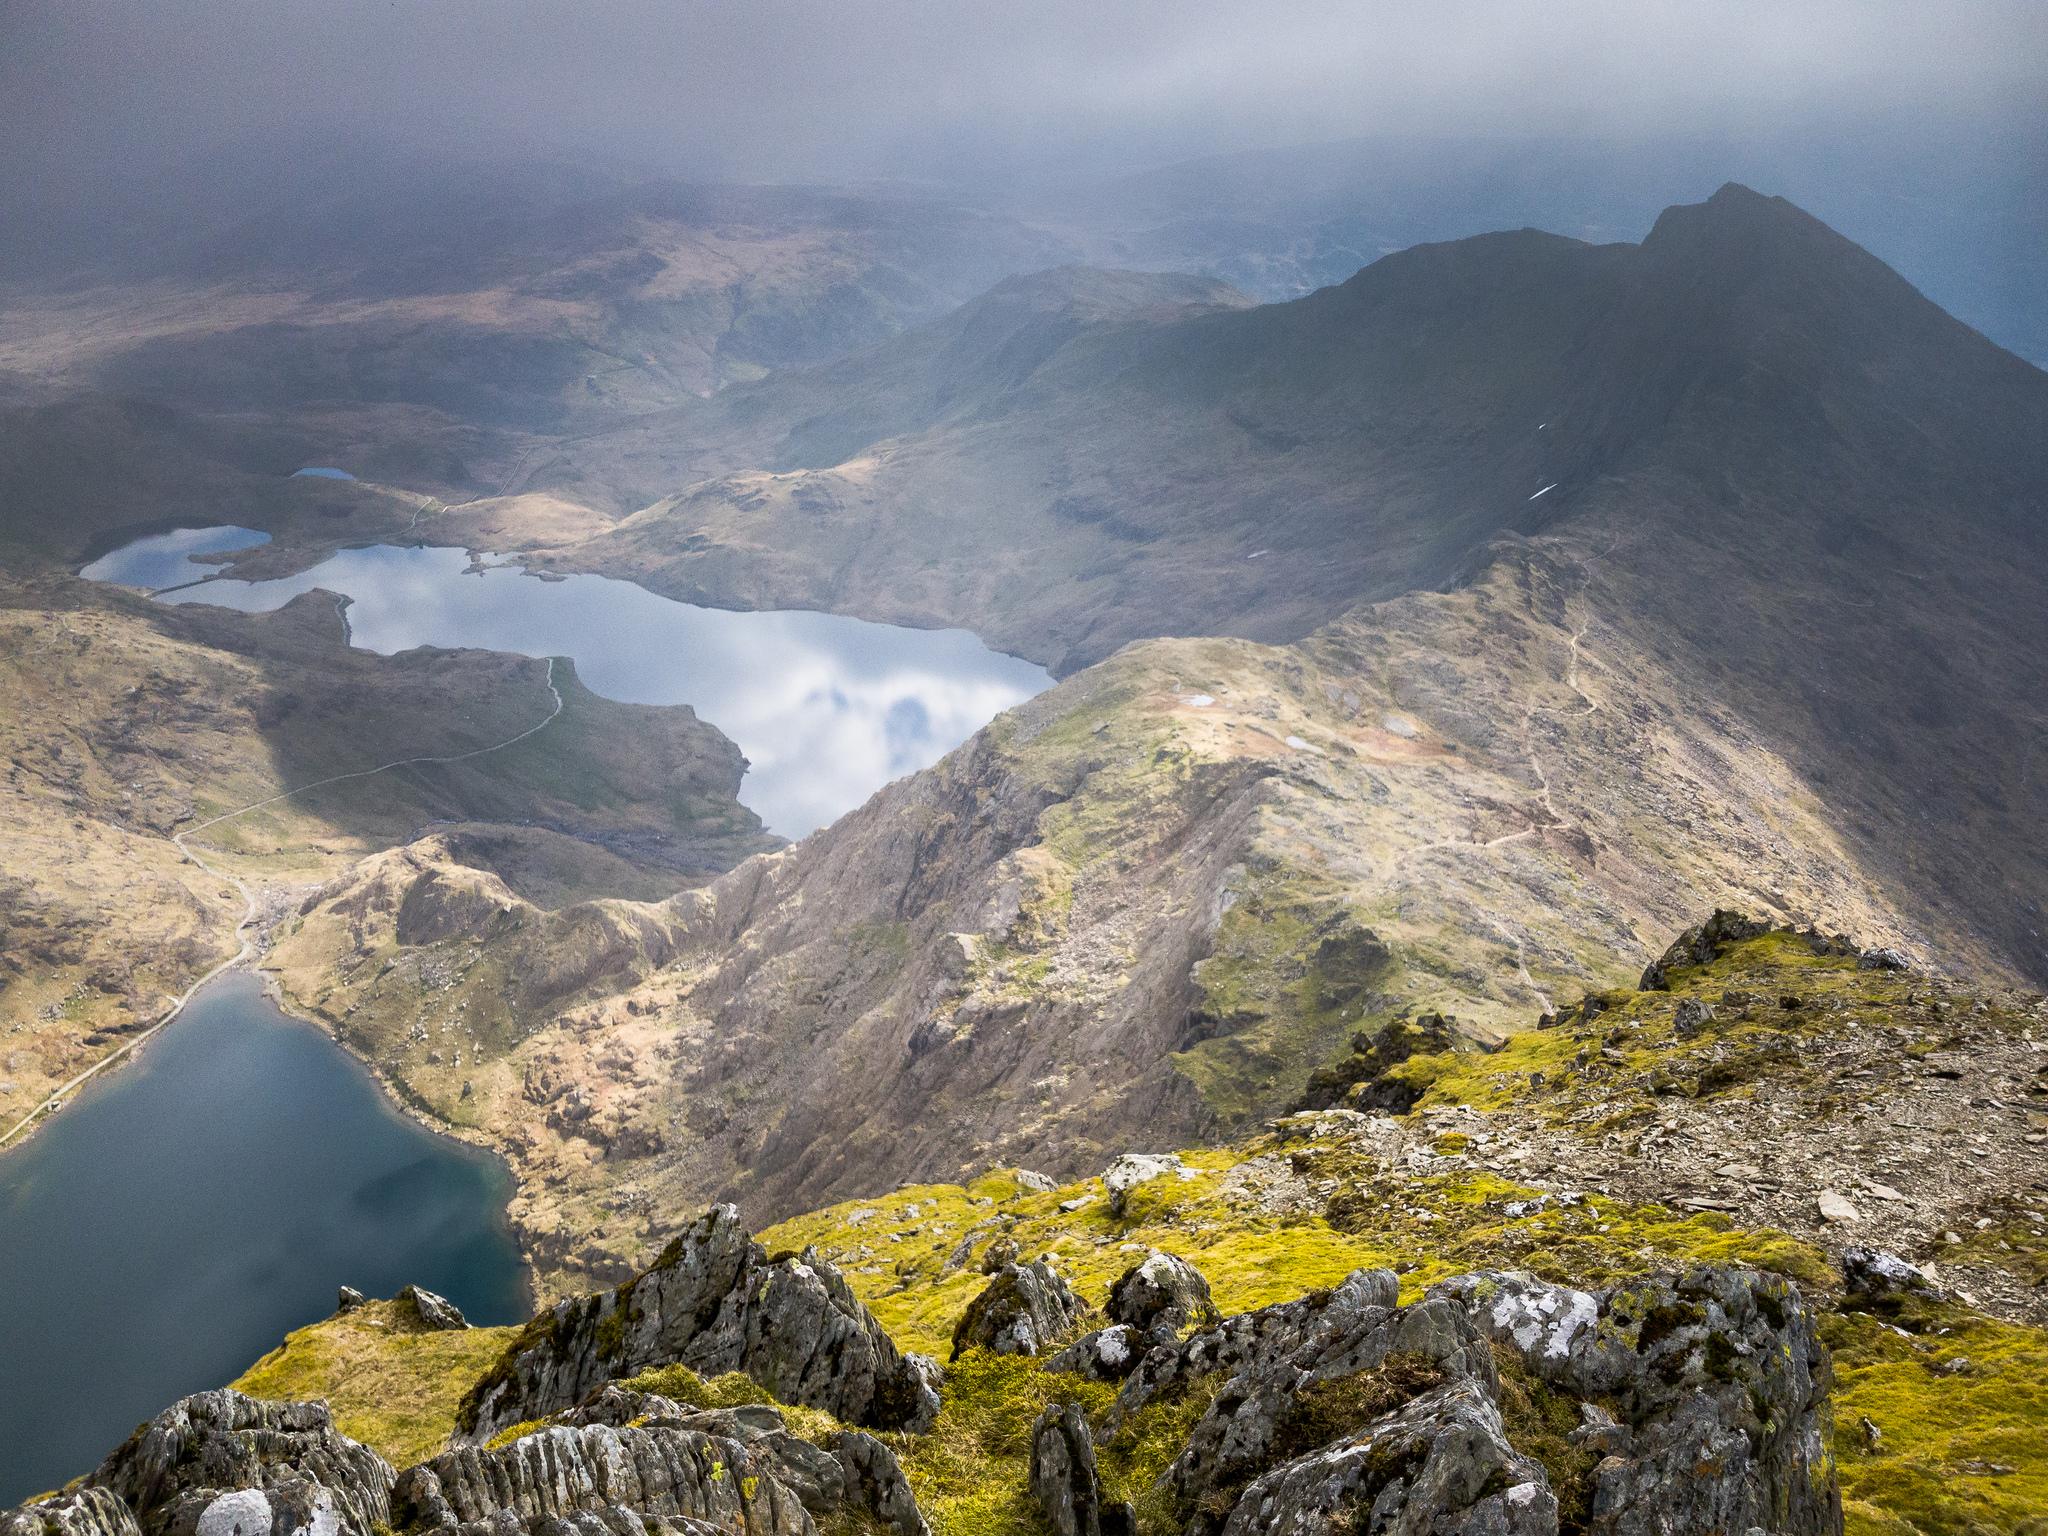 The view from the summit of mount Snowdon has been voted the best in Britain